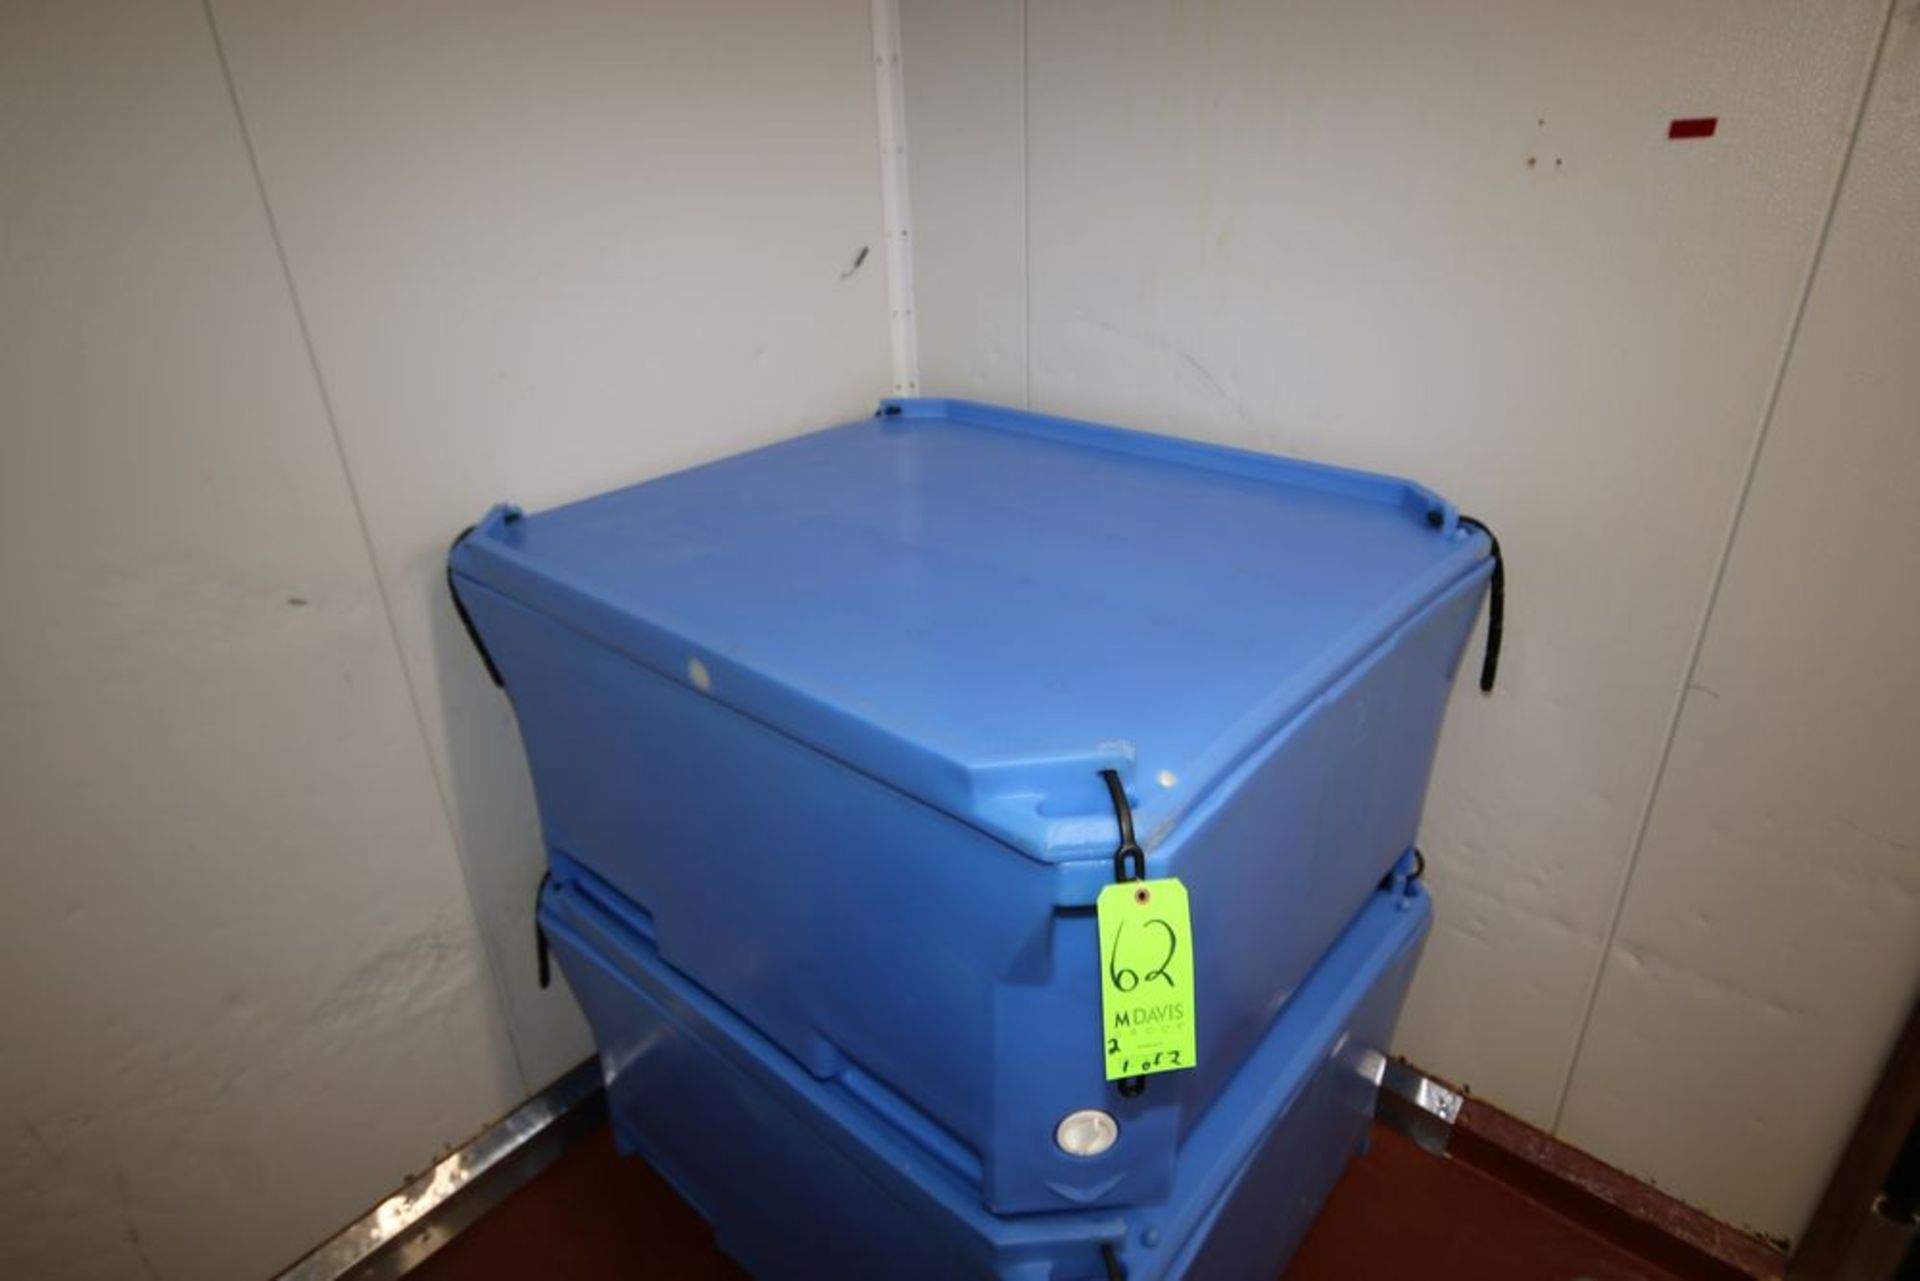 Ice Totes with Lids, Internal Dims.: Aprox. 44-1/2" L x 35" W x 17" Deep (LOCATED IN GLOUCESTER, MA) - Image 2 of 3